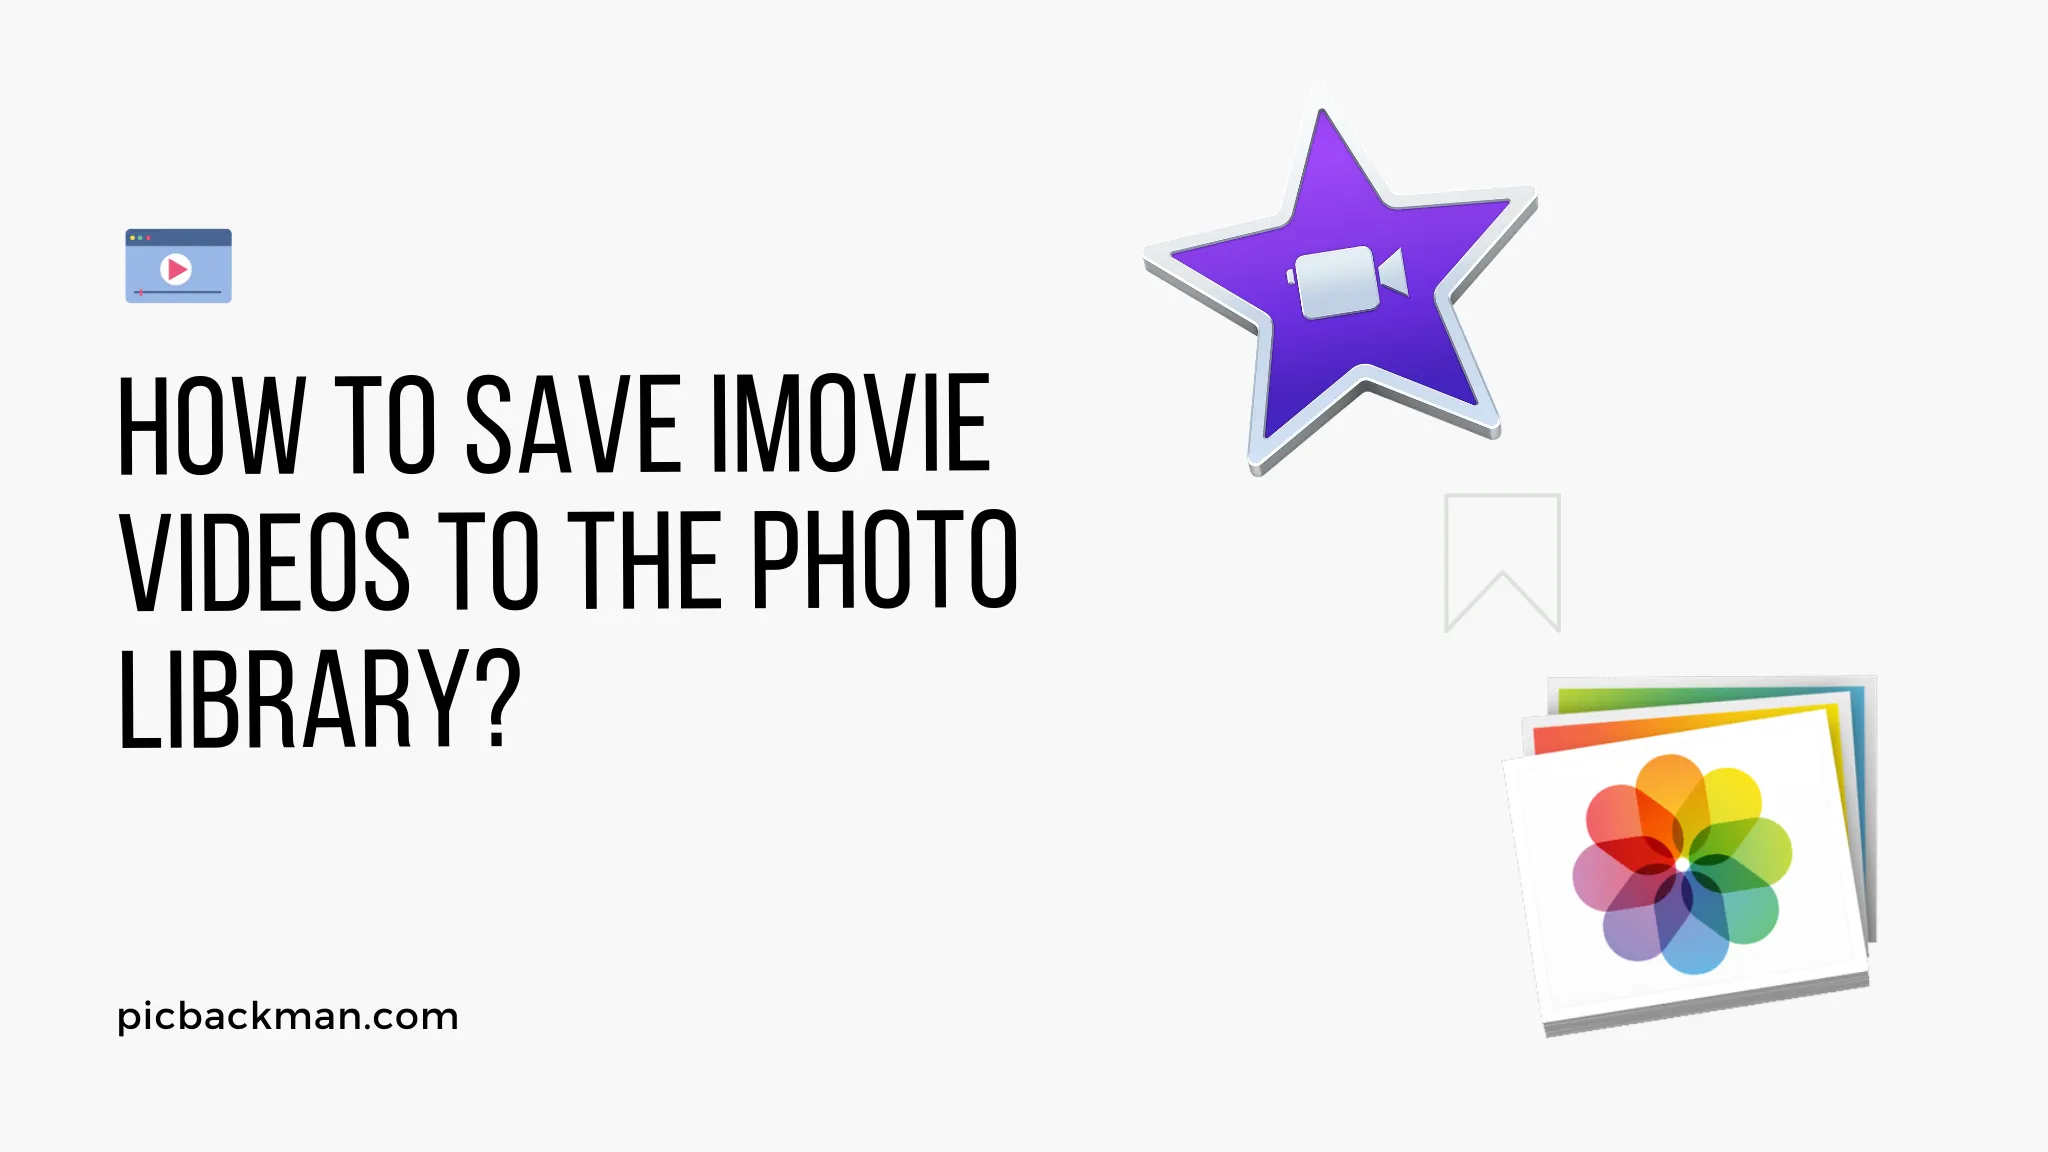 How to Save iMovie Videos to the Photo Library?